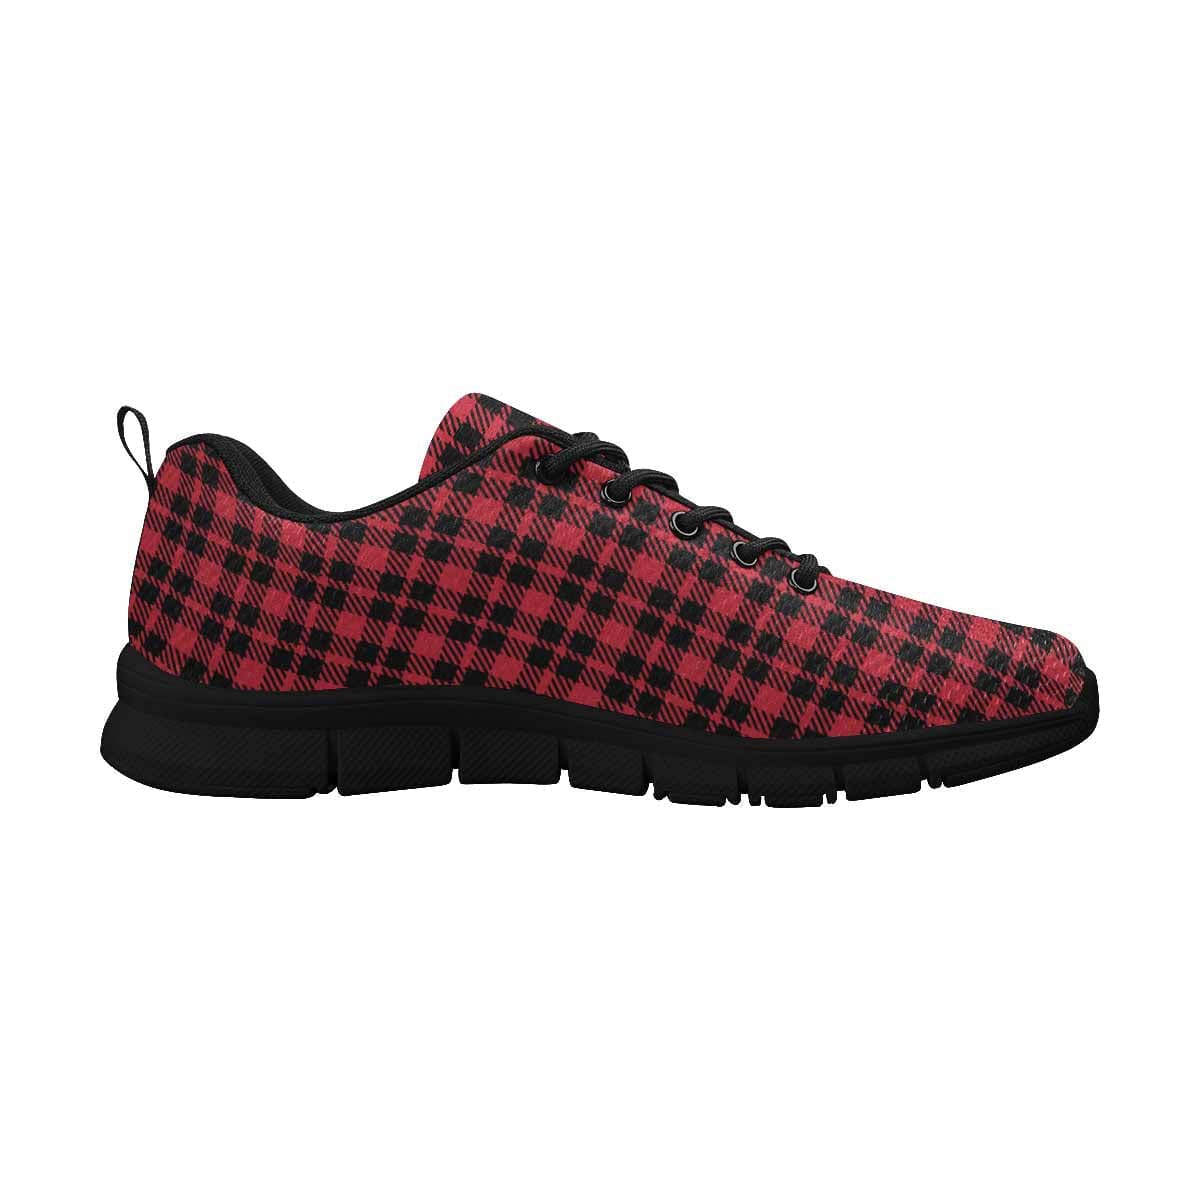 Sneakers For Men, Buffalo Plaid Red And Black - Running Shoes Dg844 ...